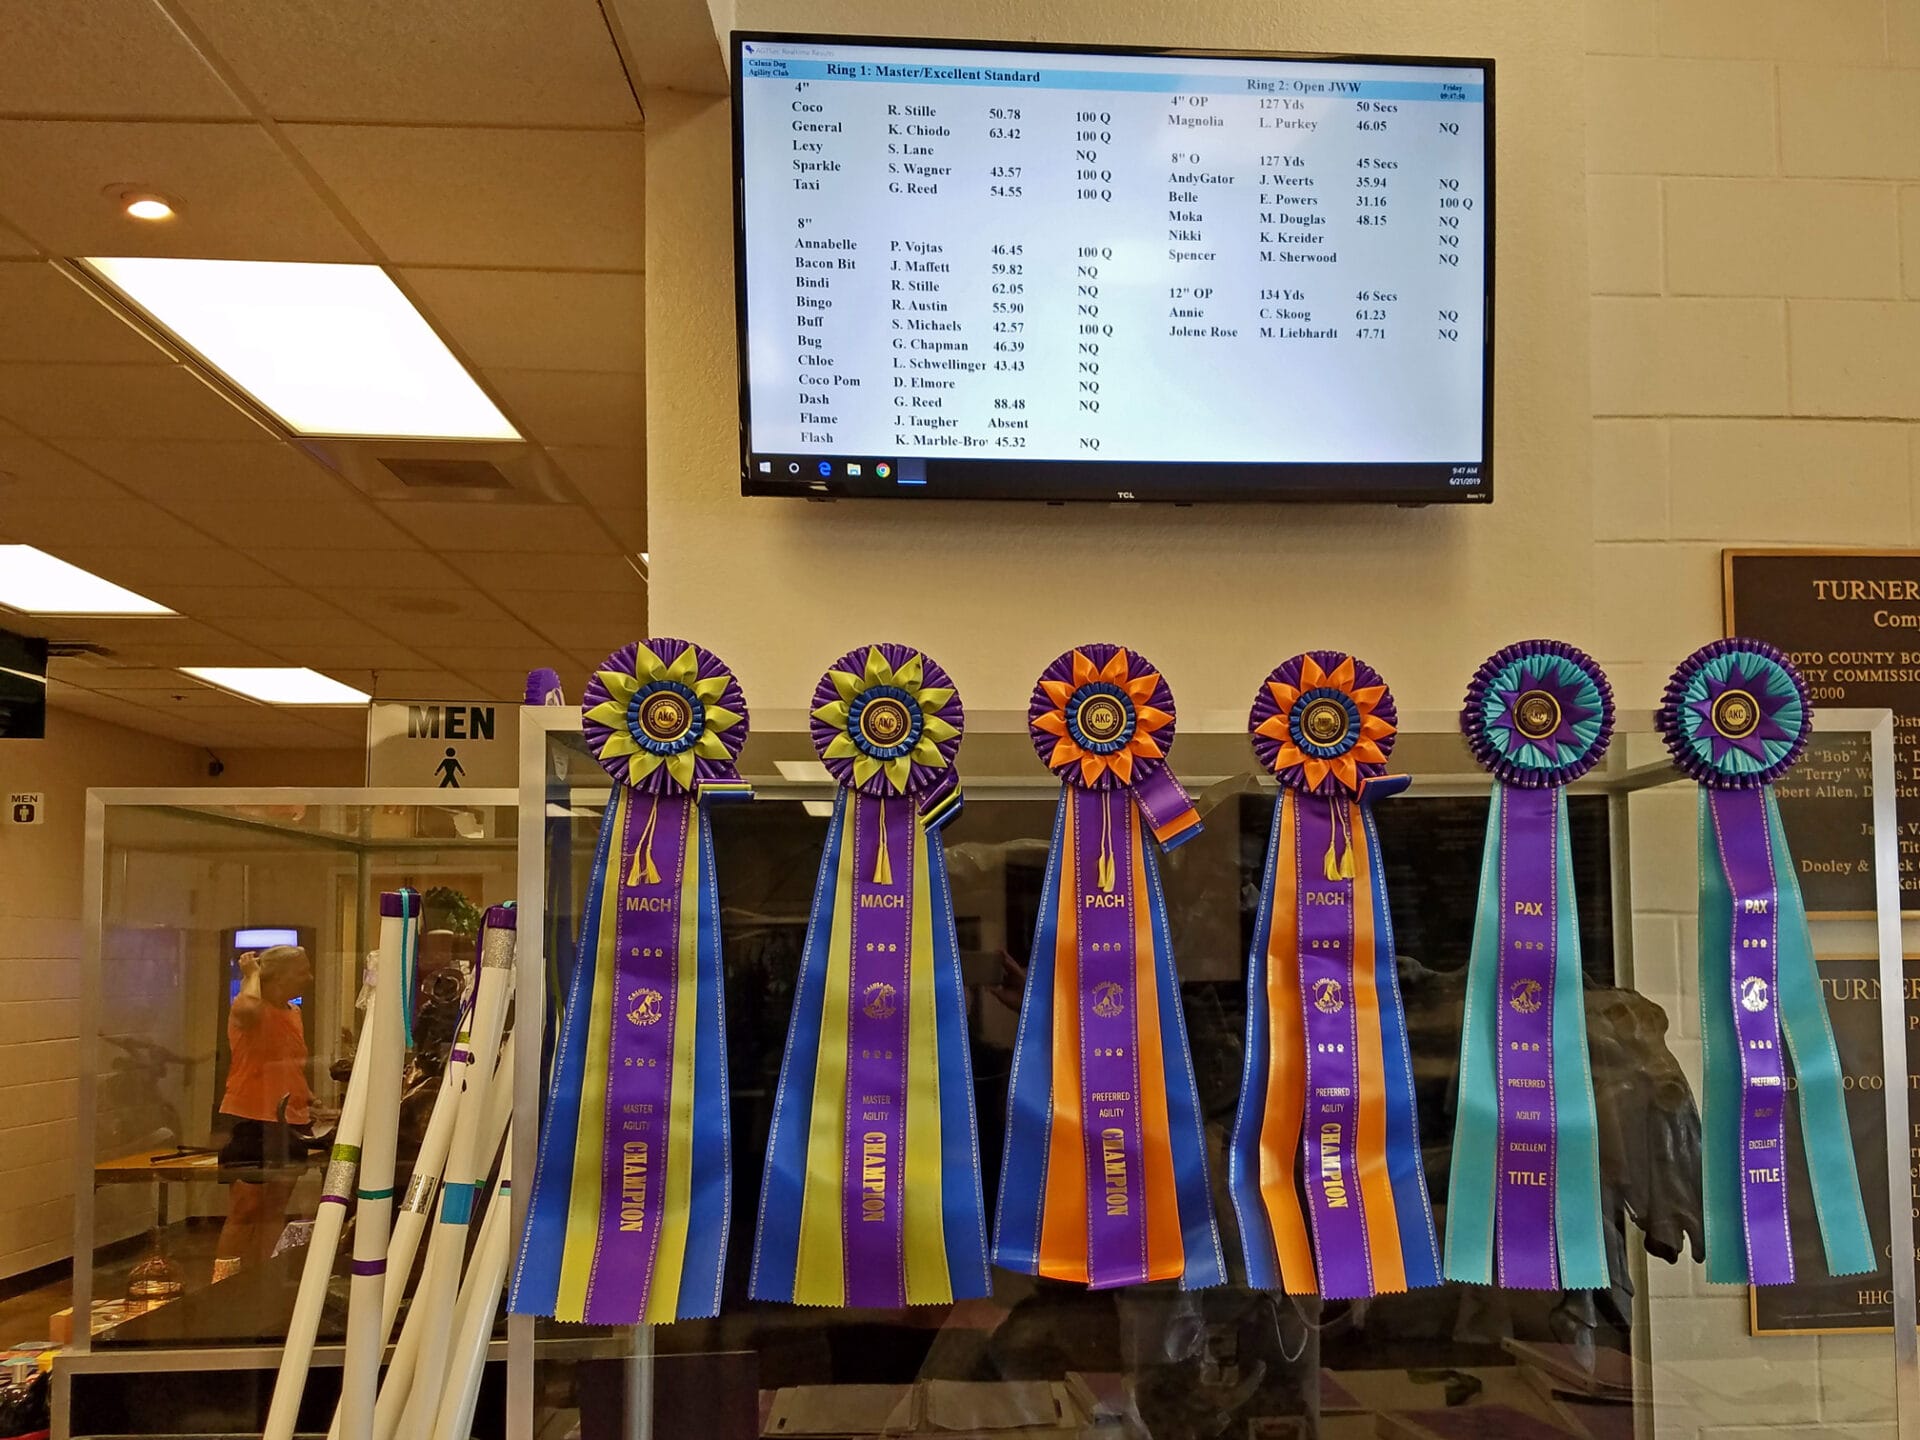 PACH, MACH and PAX large ribbons at Turner Agri-Civic Center, Arcadia FL